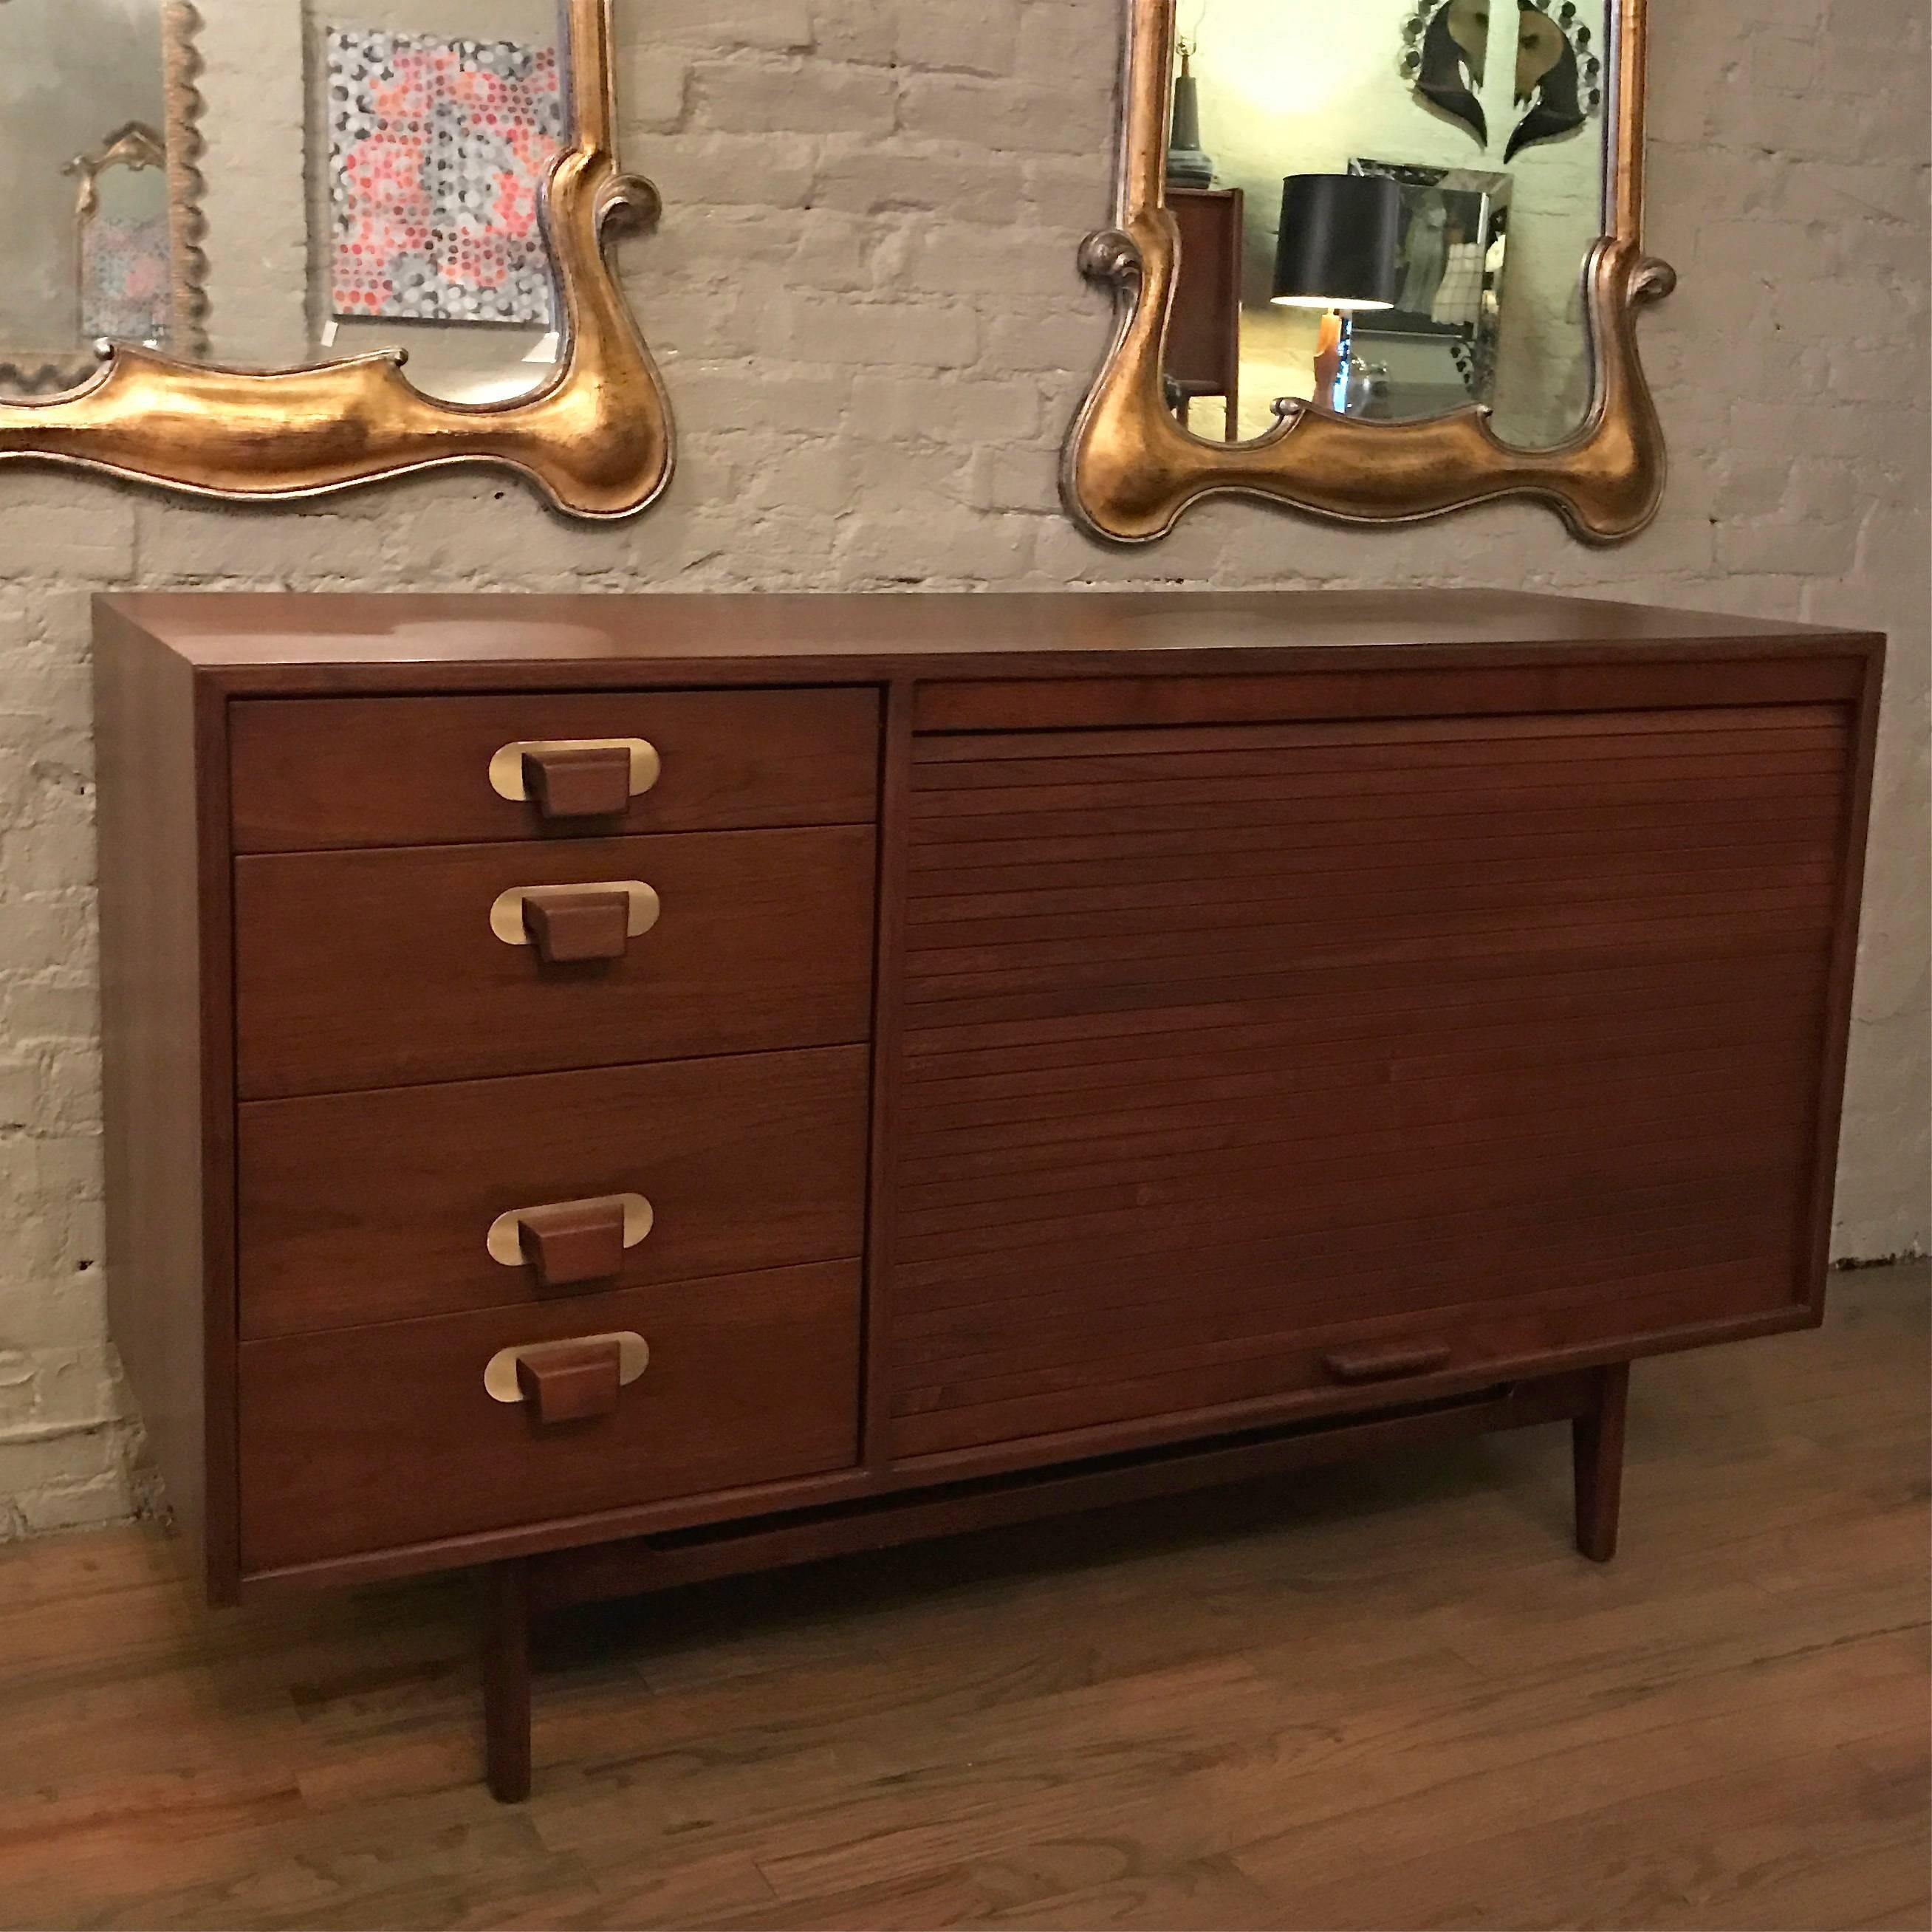 Early, Mid-Century Modern, compact, walnut credenza by Jens Risom featuring a tambour front concealing shelving and four side drawers with brass accented pulls.